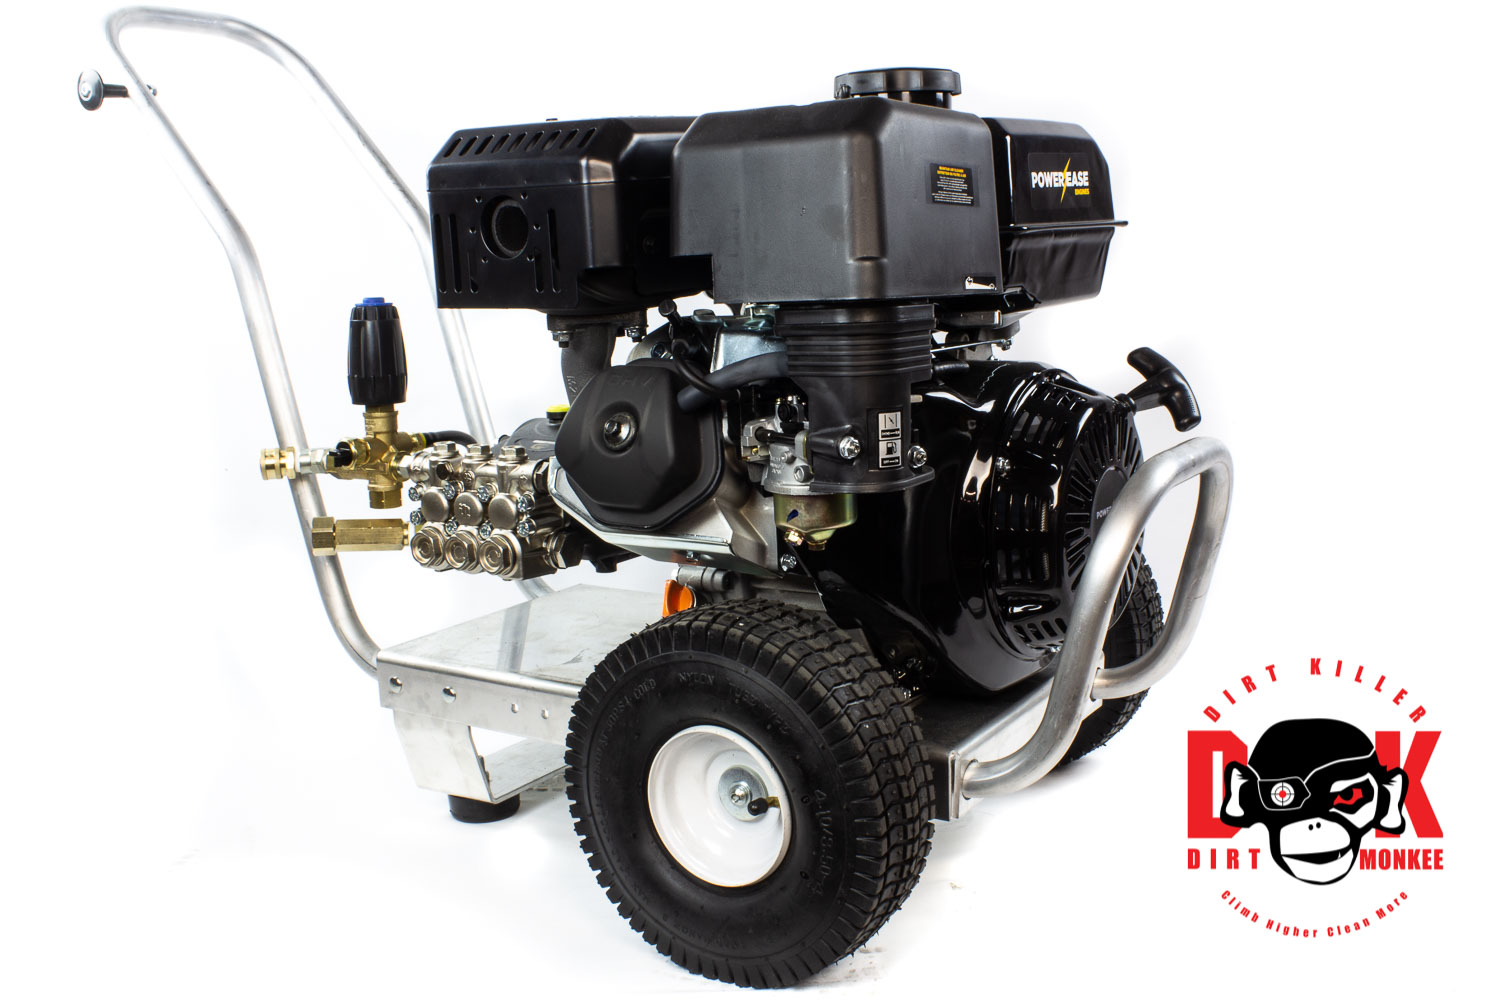 Starter Kit Direct Drive Gas Pressure Washer 15 HP 3000 PSI 5 GPM-image_1